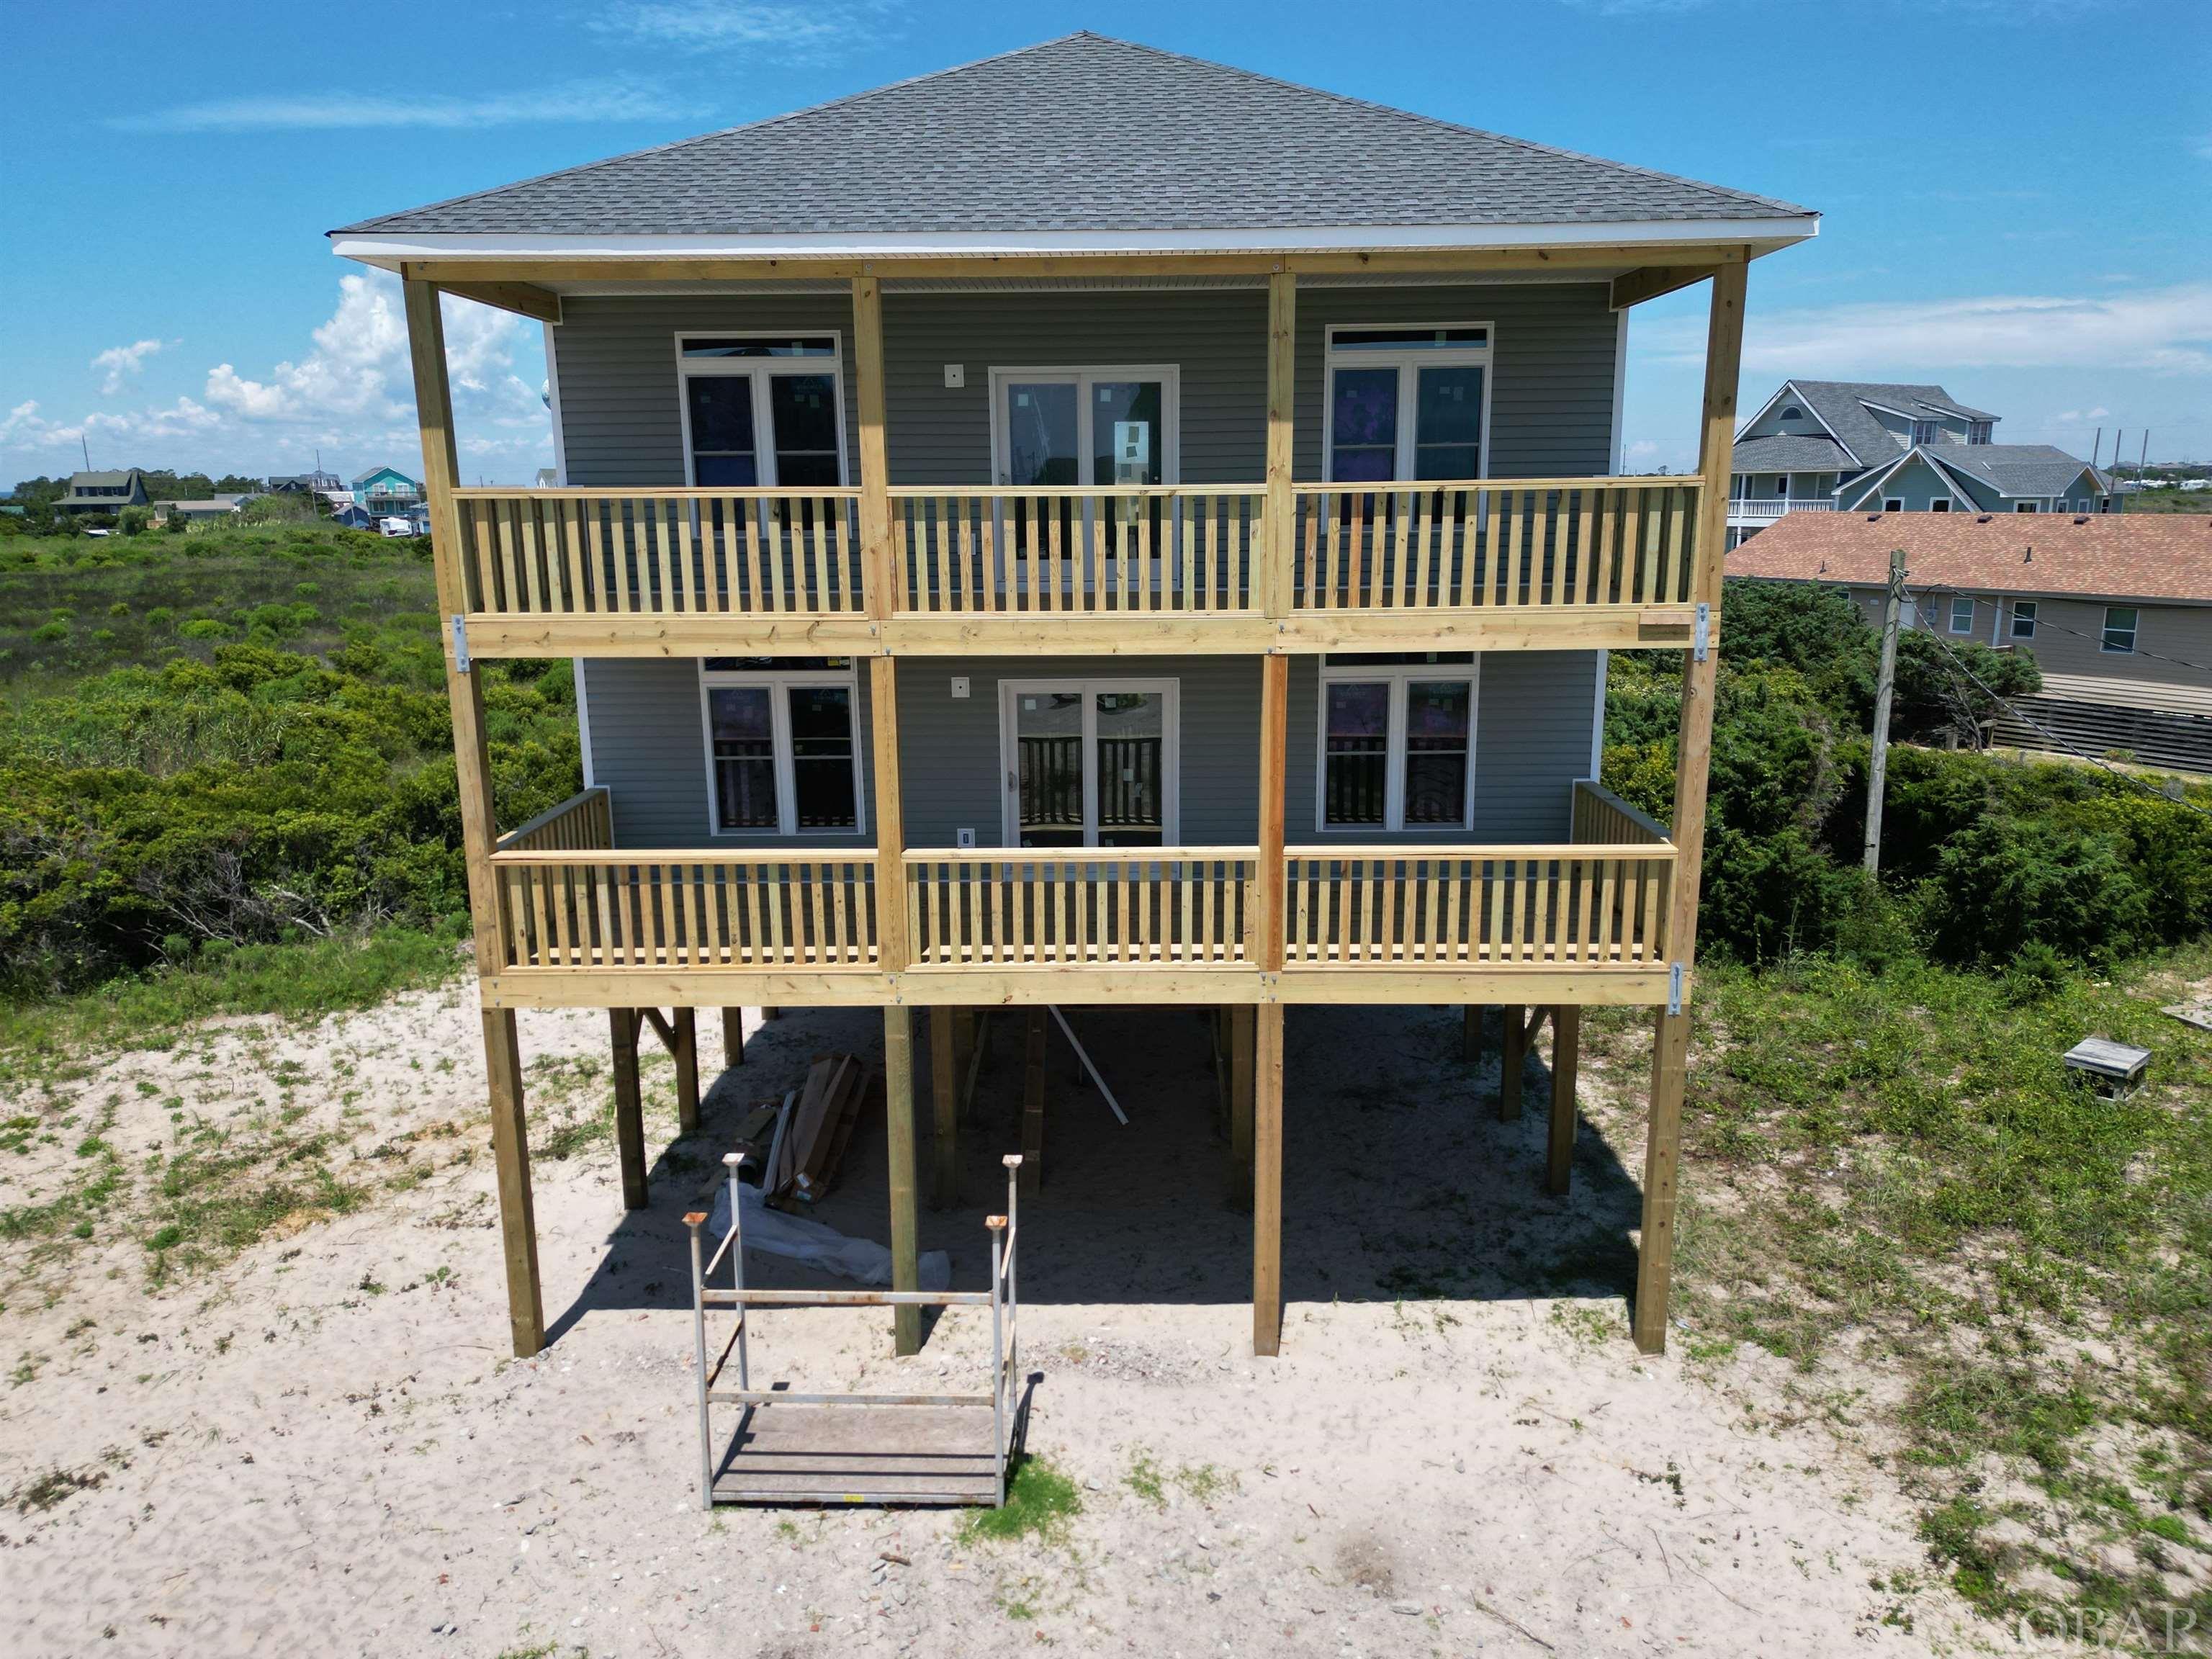 New construction with SPECTACULAR ocean views!  Estimated advertised rental income projections of $155,000 and $170,000 provided by Resort Realty and Vacasa. Located just steps from the beach in a prime water sports location close to the Rodanthe Pier! Spacious five bedroom, 4 and a half baths open concept floor plan.  First floor master suite and two additional bedrooms, full bath, bonus room and laundry. Main level features kitchen with granite counter tops, custom tile back splash, appliances opening  into family room and a second master suite.    With over 900 square feet of deck space, expect to sit and watch beautiful sunrises and sunsets.   An additional bonus of approximately 700 square feet of unfinished space located above flood plain.   Construction projected to be completed the end of September.   You DON'T want to miss this rare opportunity to purchase a brand new home!  The ocean views will truly WOW you!